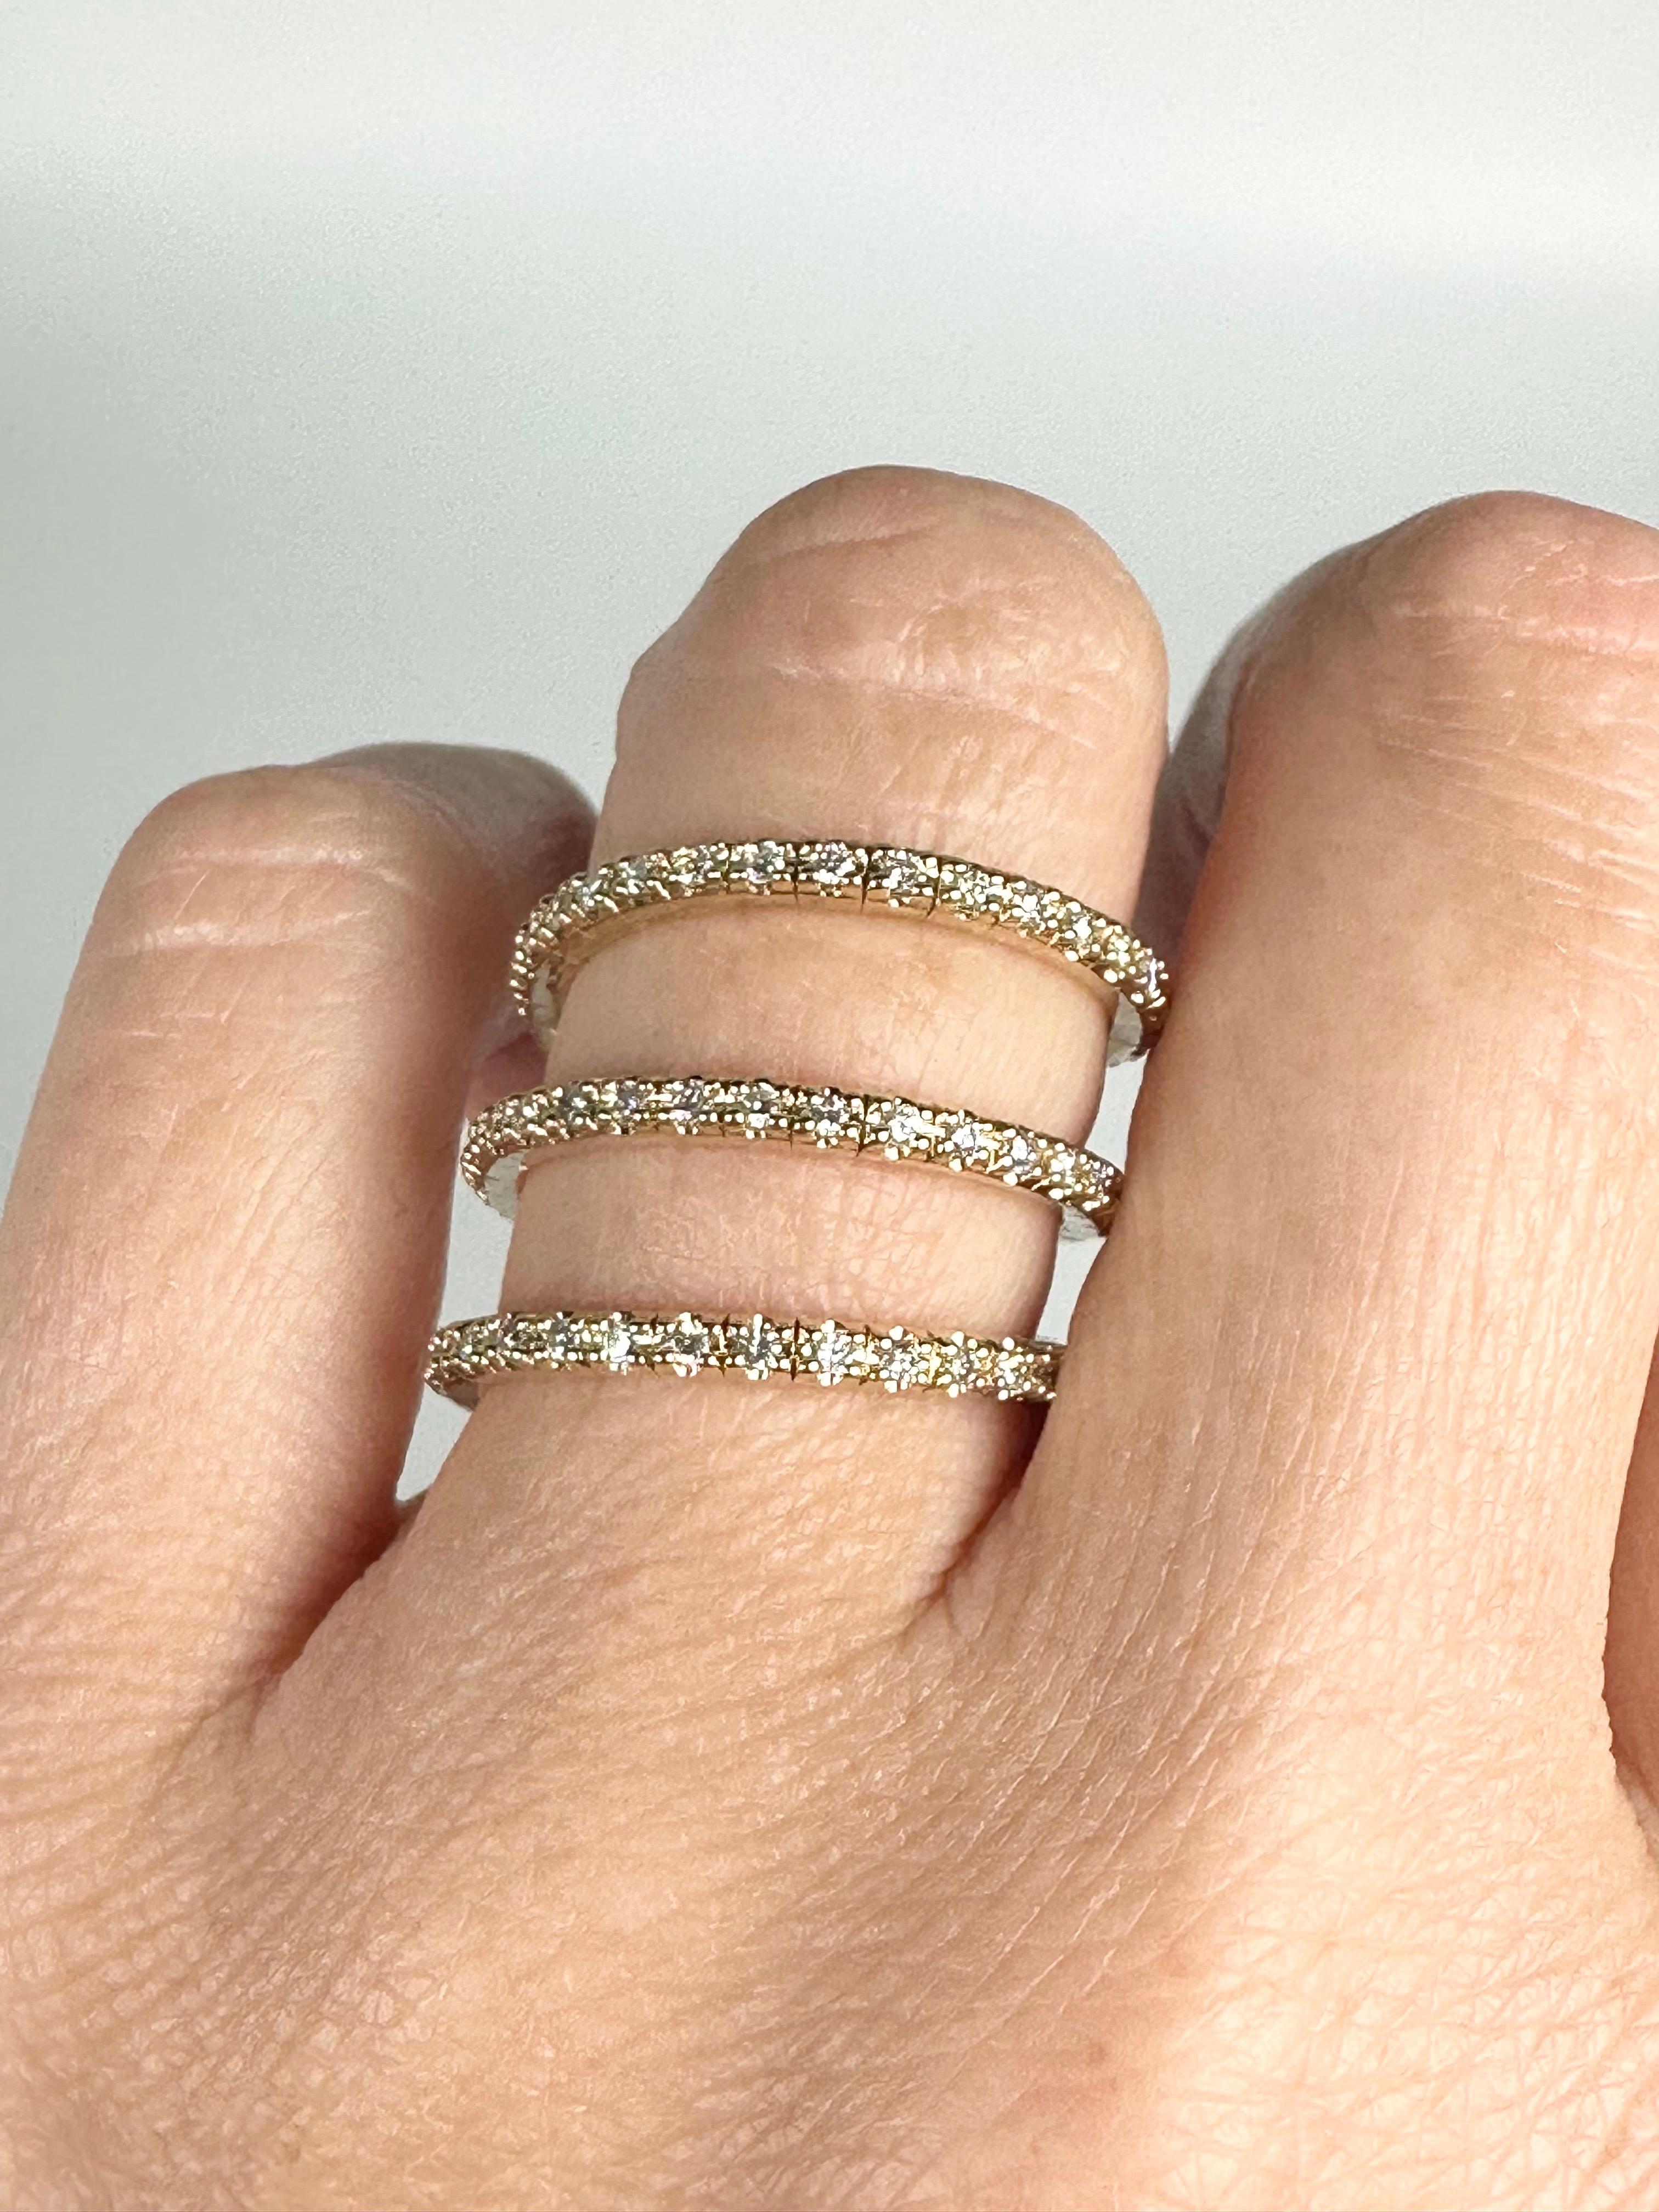 Brilliant Cut Rare flexible diamond ring fits all sizes spiral ring 14KT gold  For Sale